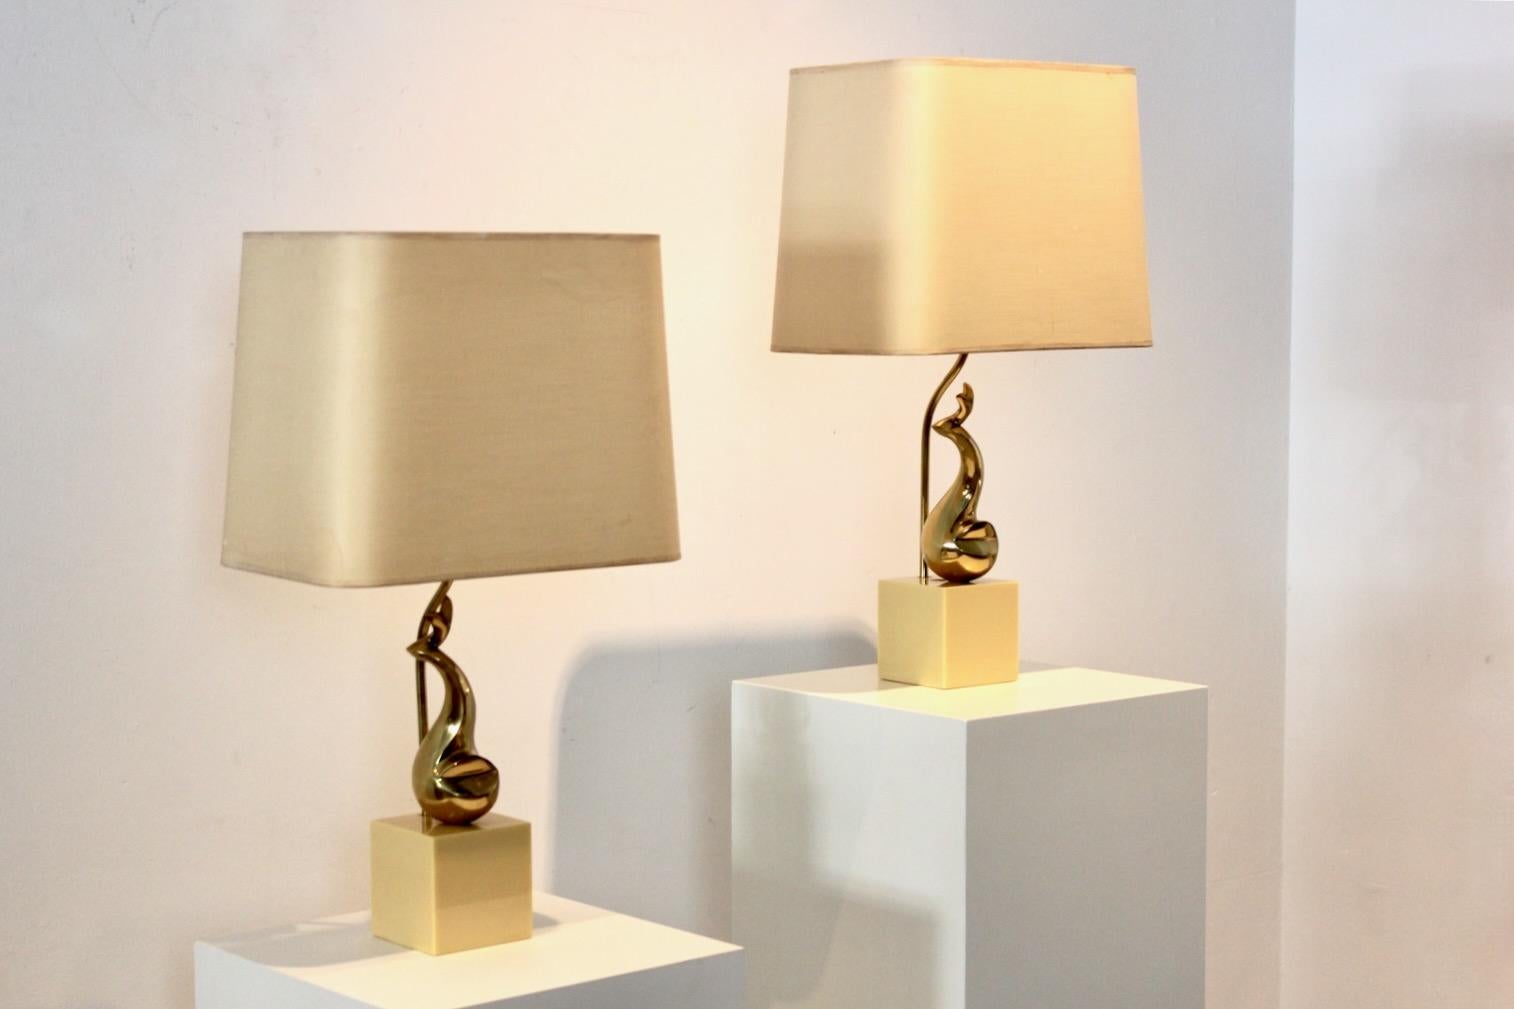 Pair of Exclusive Philippe-Jean Brass Art Sculpture Table Lamps, Signed For Sale 9